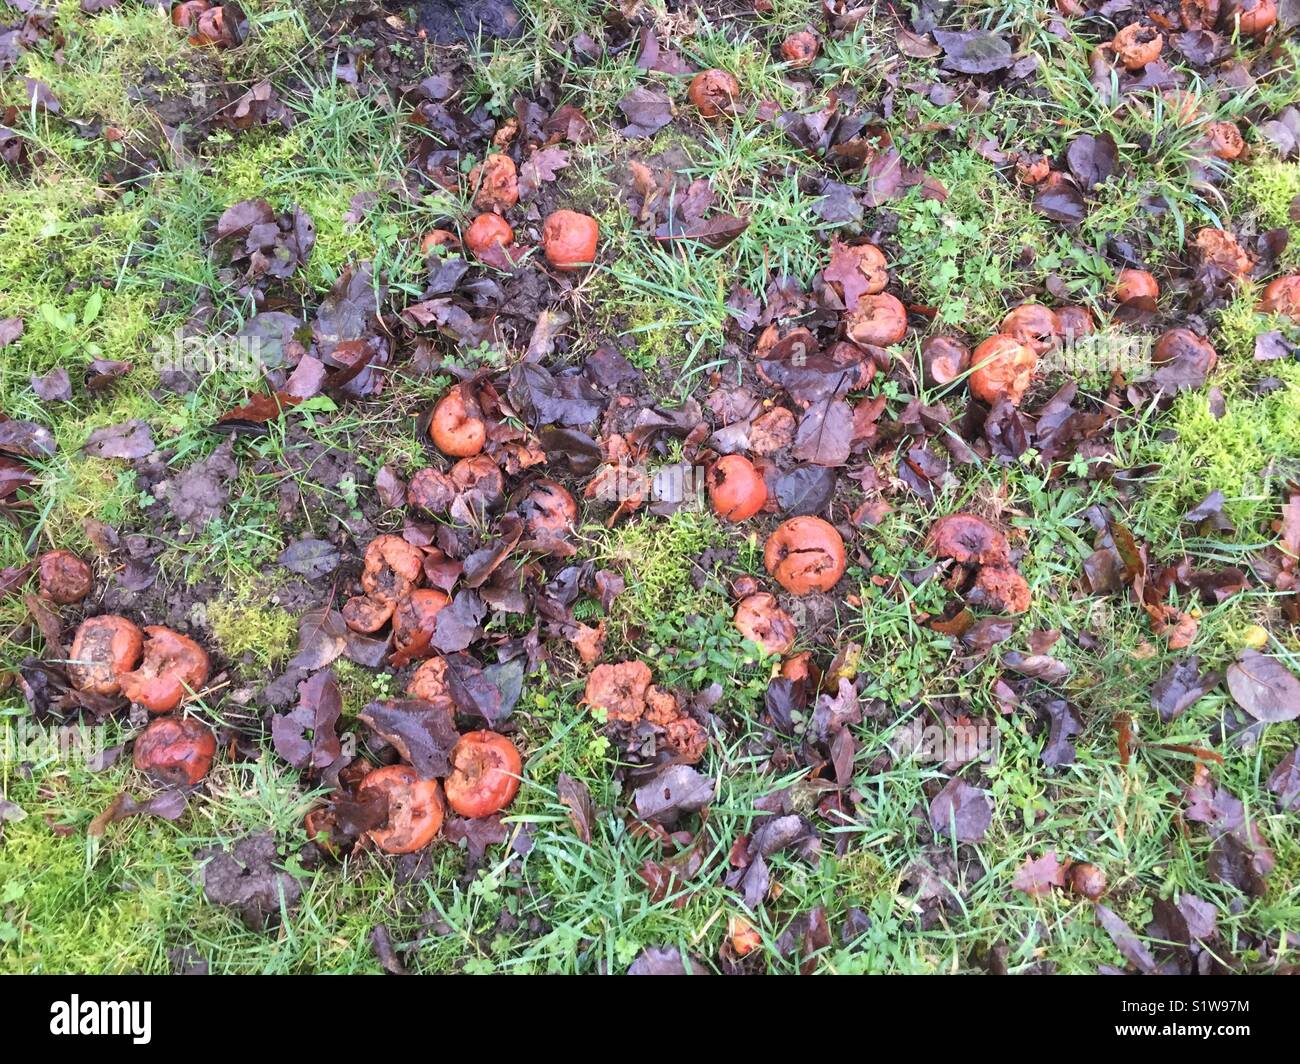 Bright green grass, wet leaves and rotting apples in an orchard in Normandy. France. Winter Stock Photo